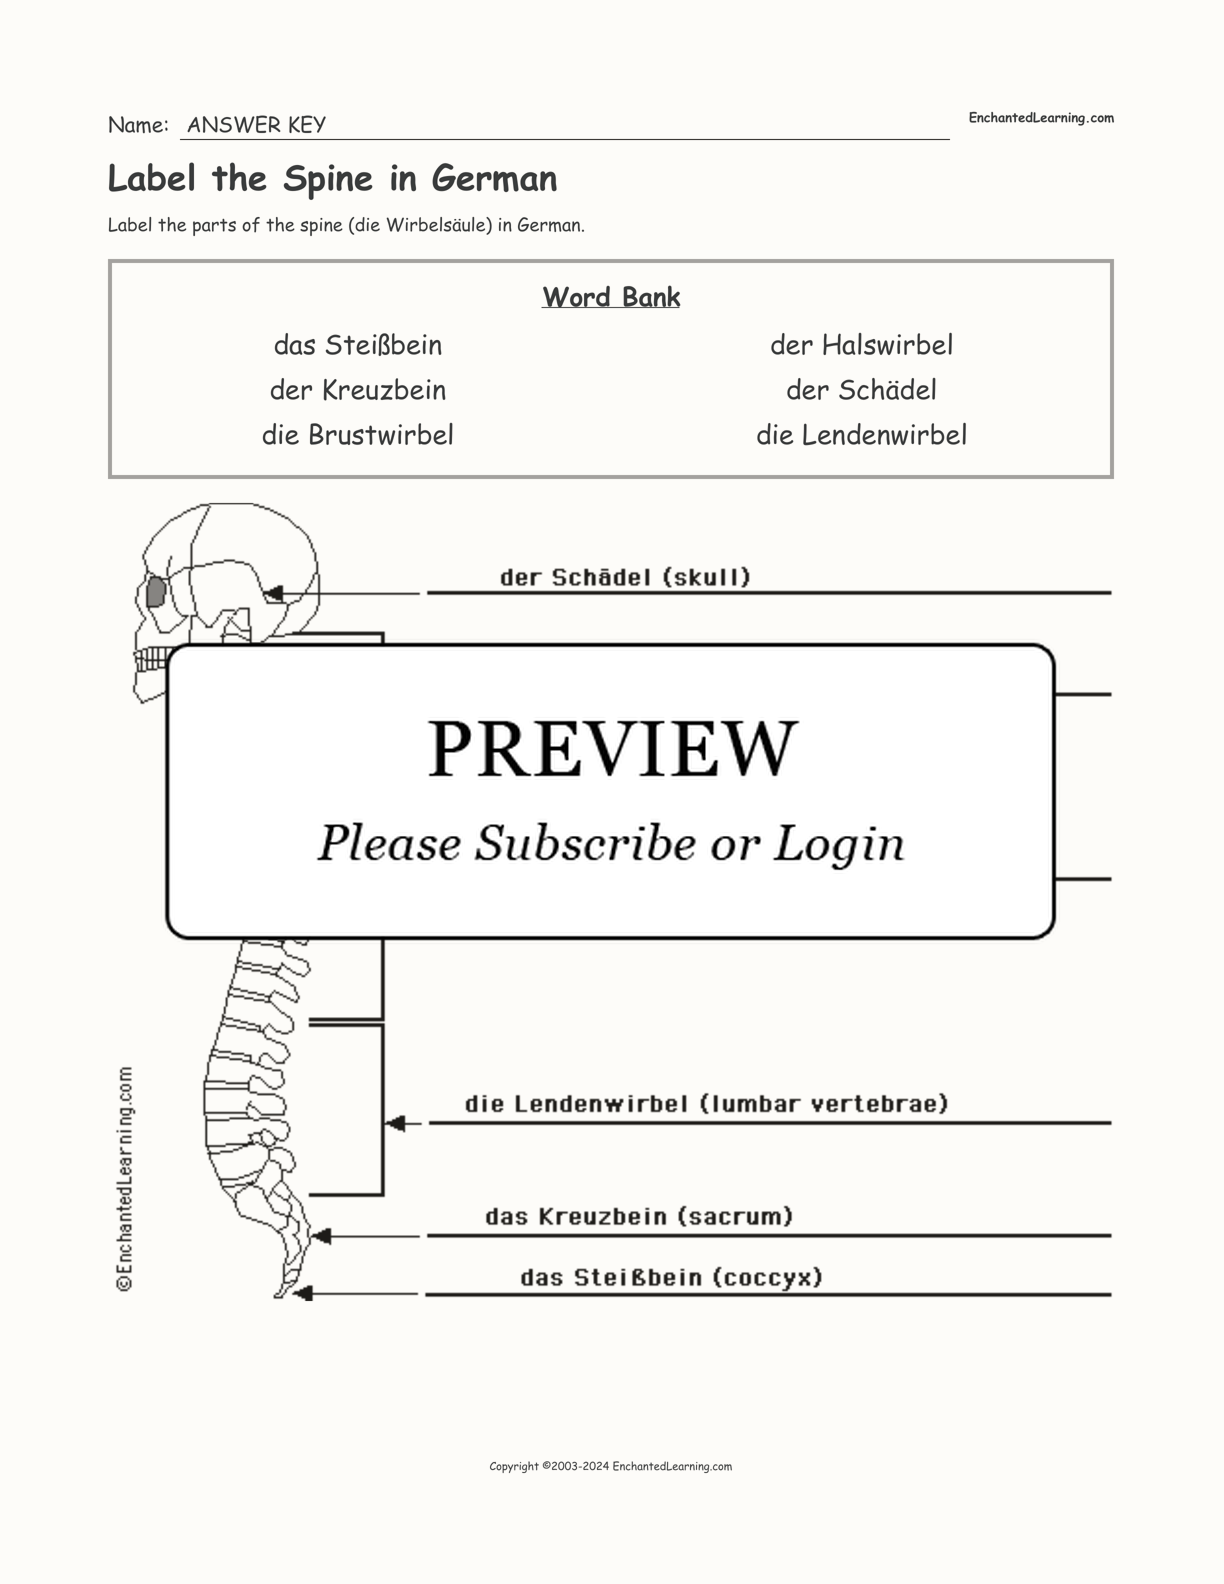 Label the Spine in German interactive worksheet page 2